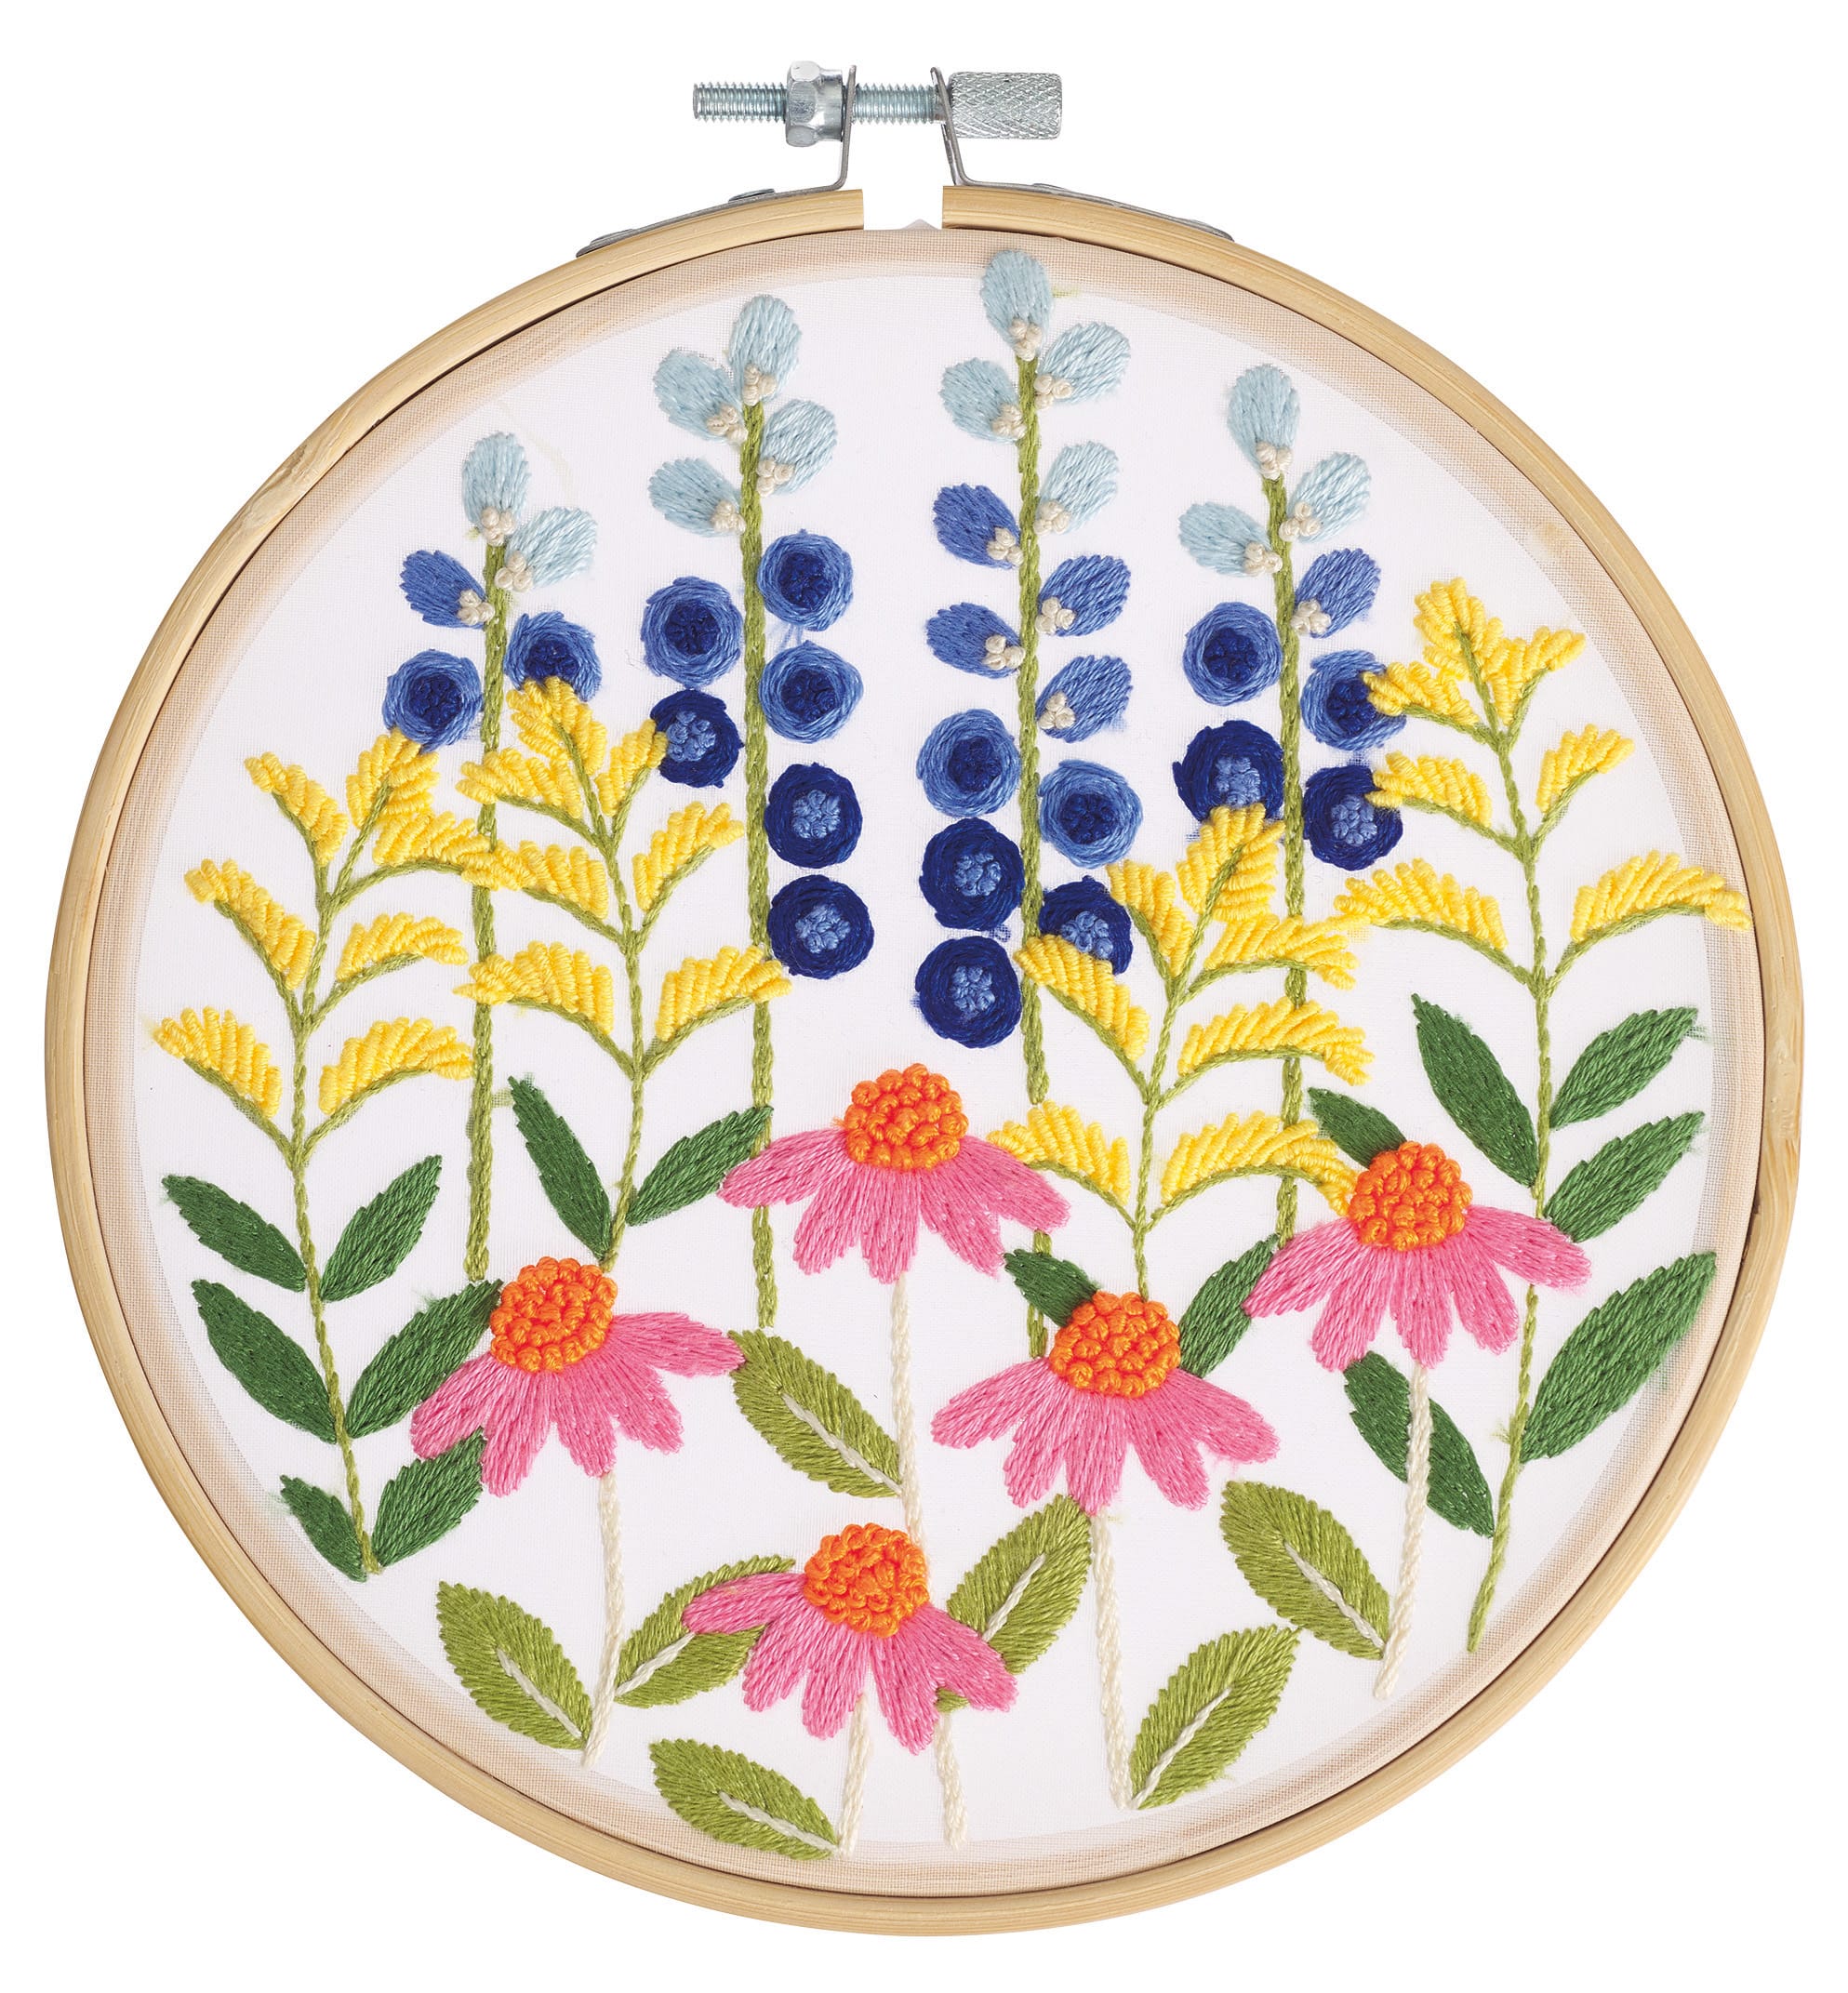 Embroidered Flowers 1 Embroidery Design